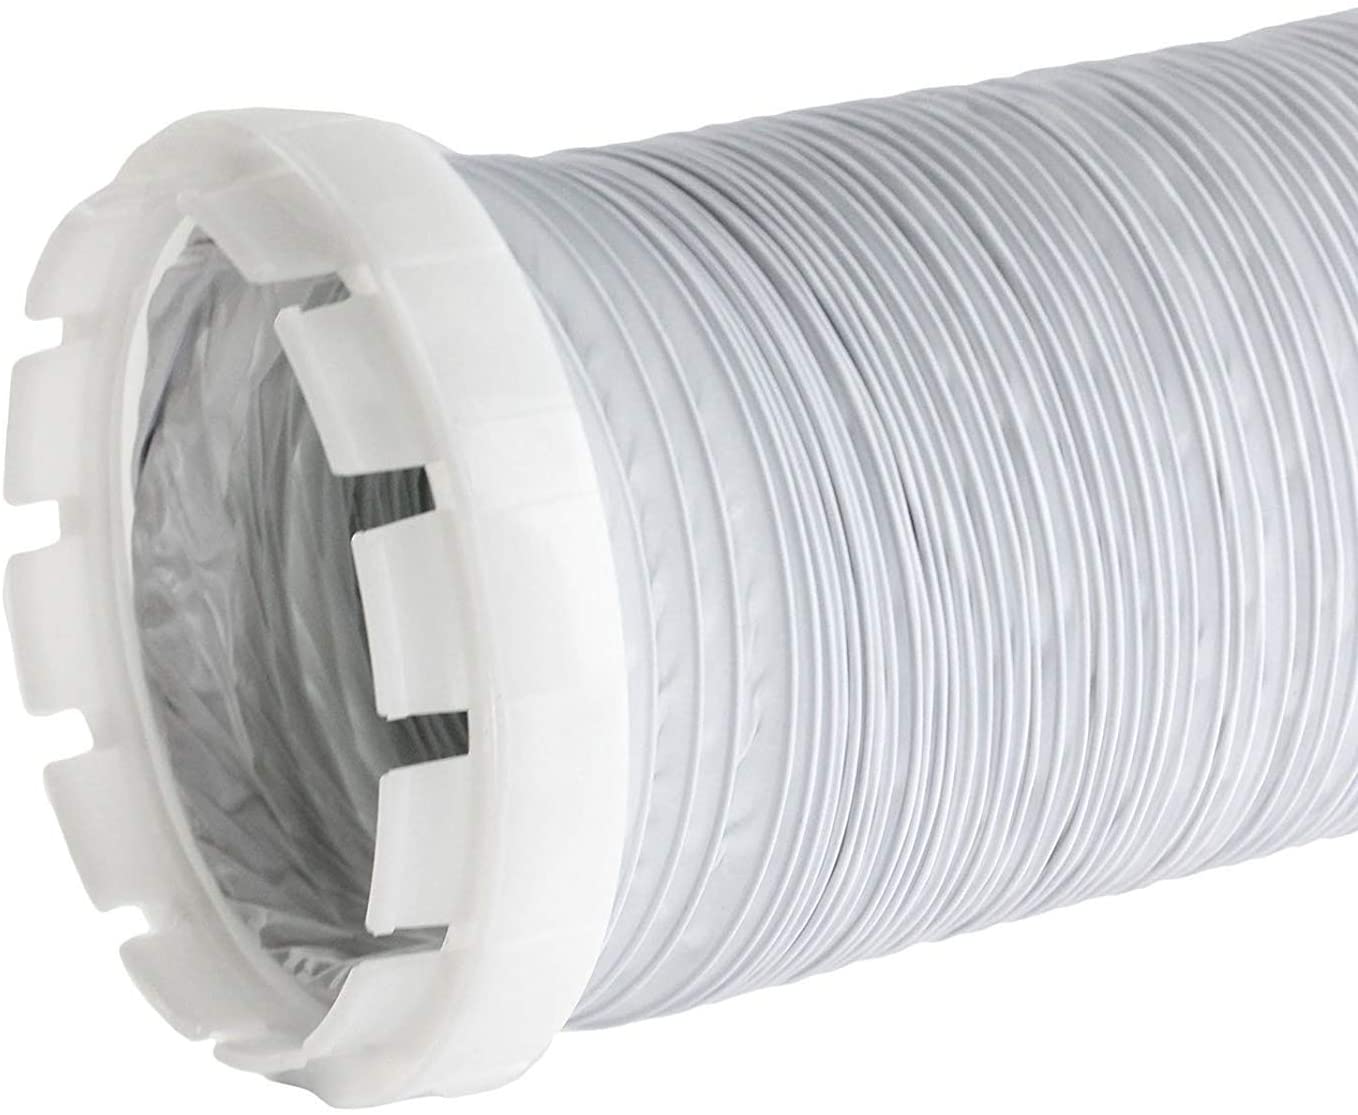 4m Vent Hose + Adapter for Hotpoint Tumble Dryer